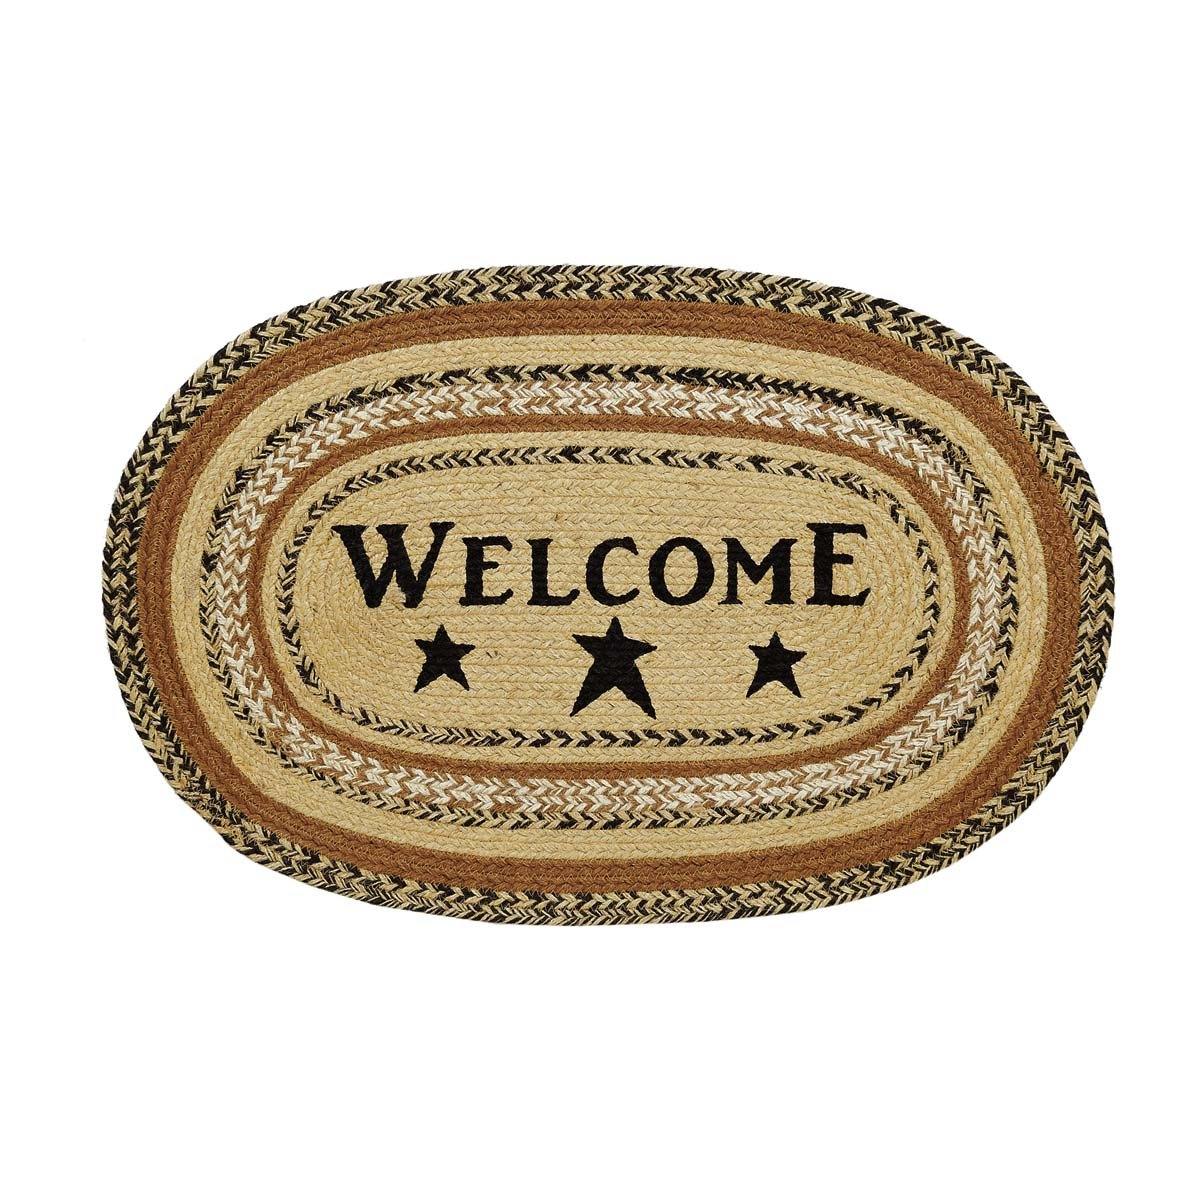 Kettle Grove Jute Rug Oval Stencil Star Welcome 20"x30" with Rug Pad VHC Brands - The Fox Decor